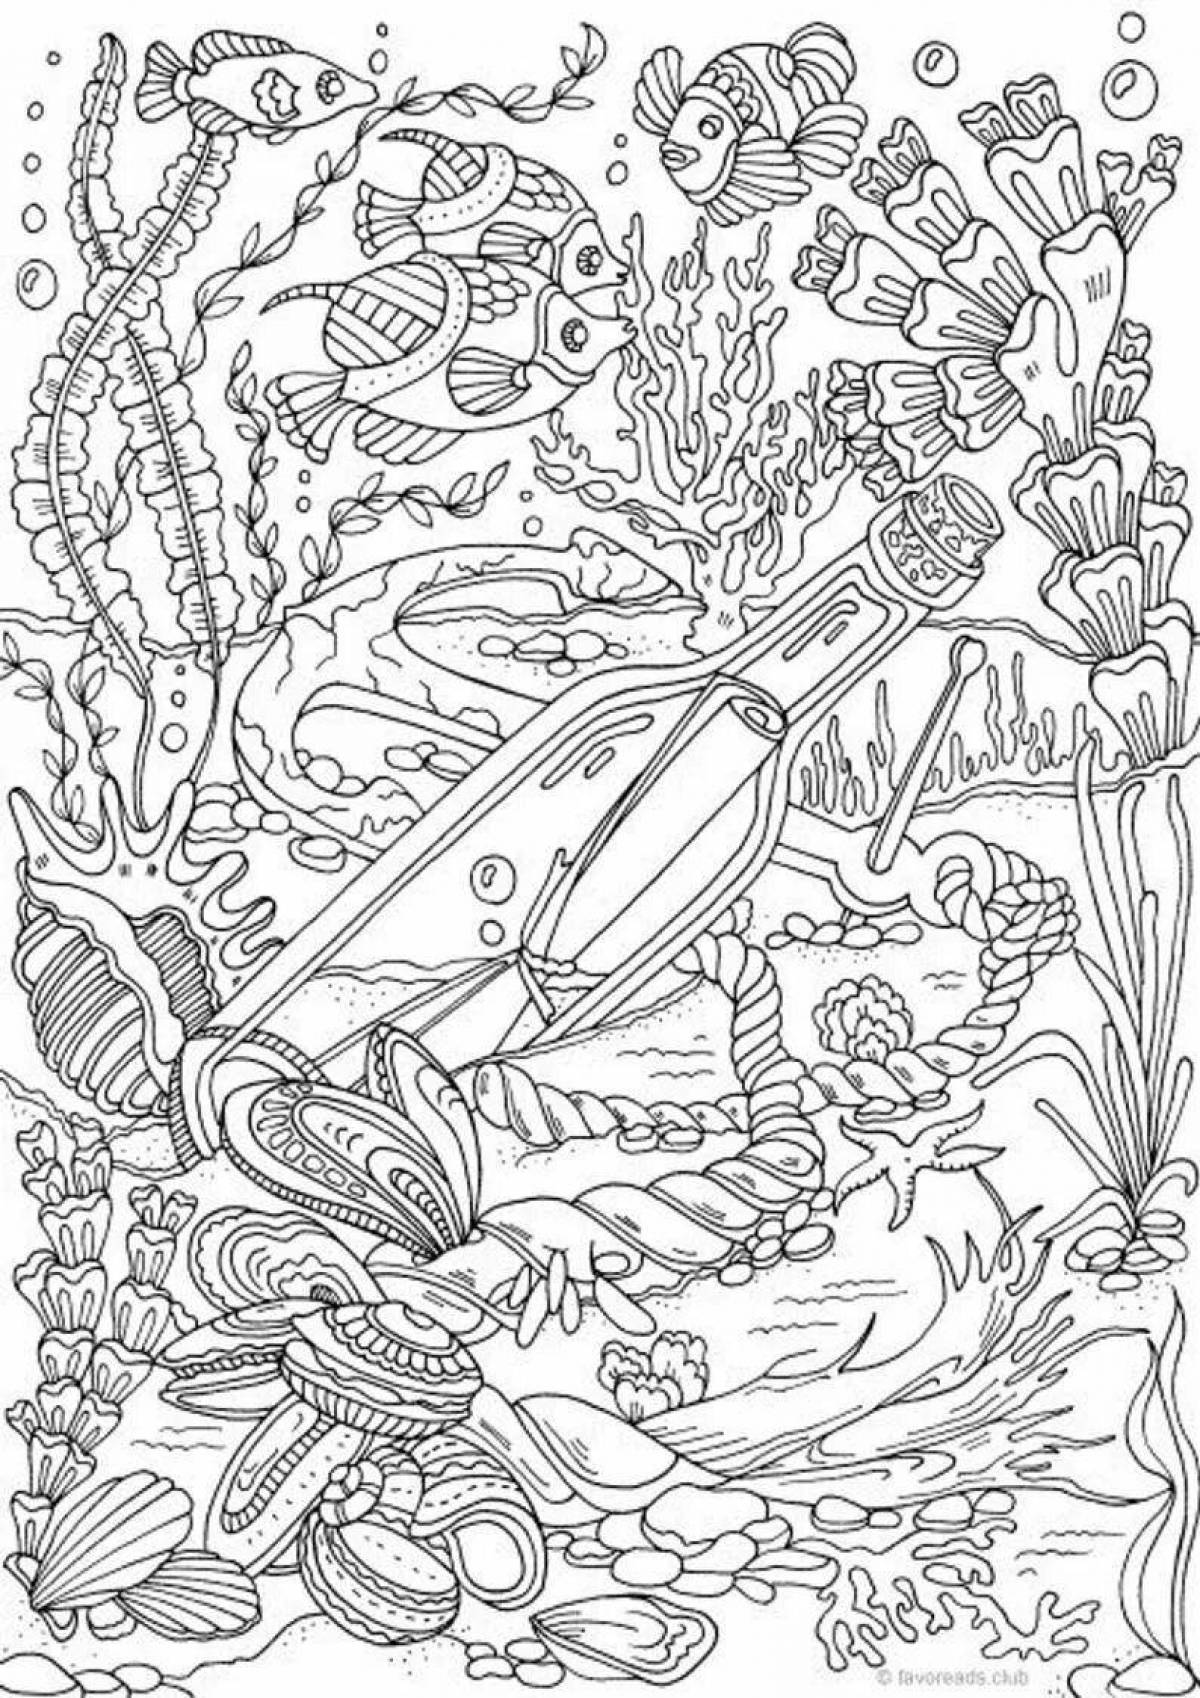 Stimulating travel coloring page